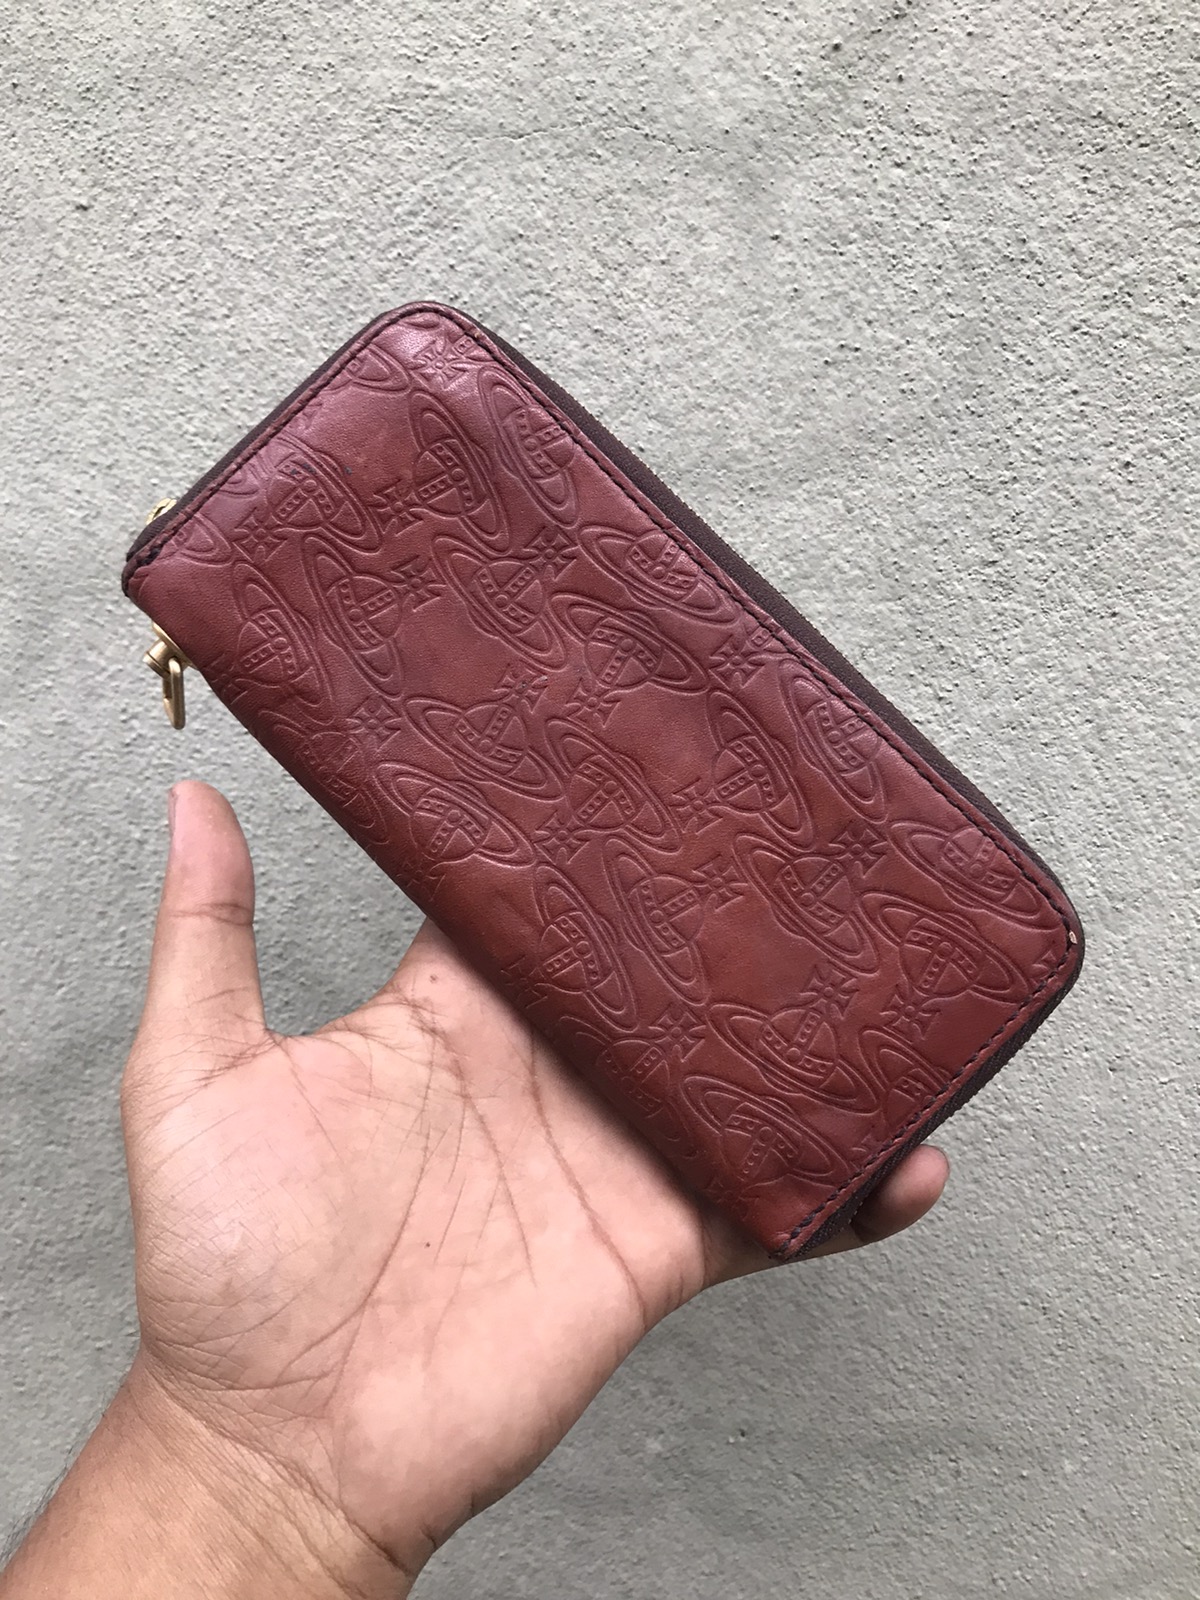 🔥OFFER🔥Authentic Vivienne Weswood Long Wallet - 2